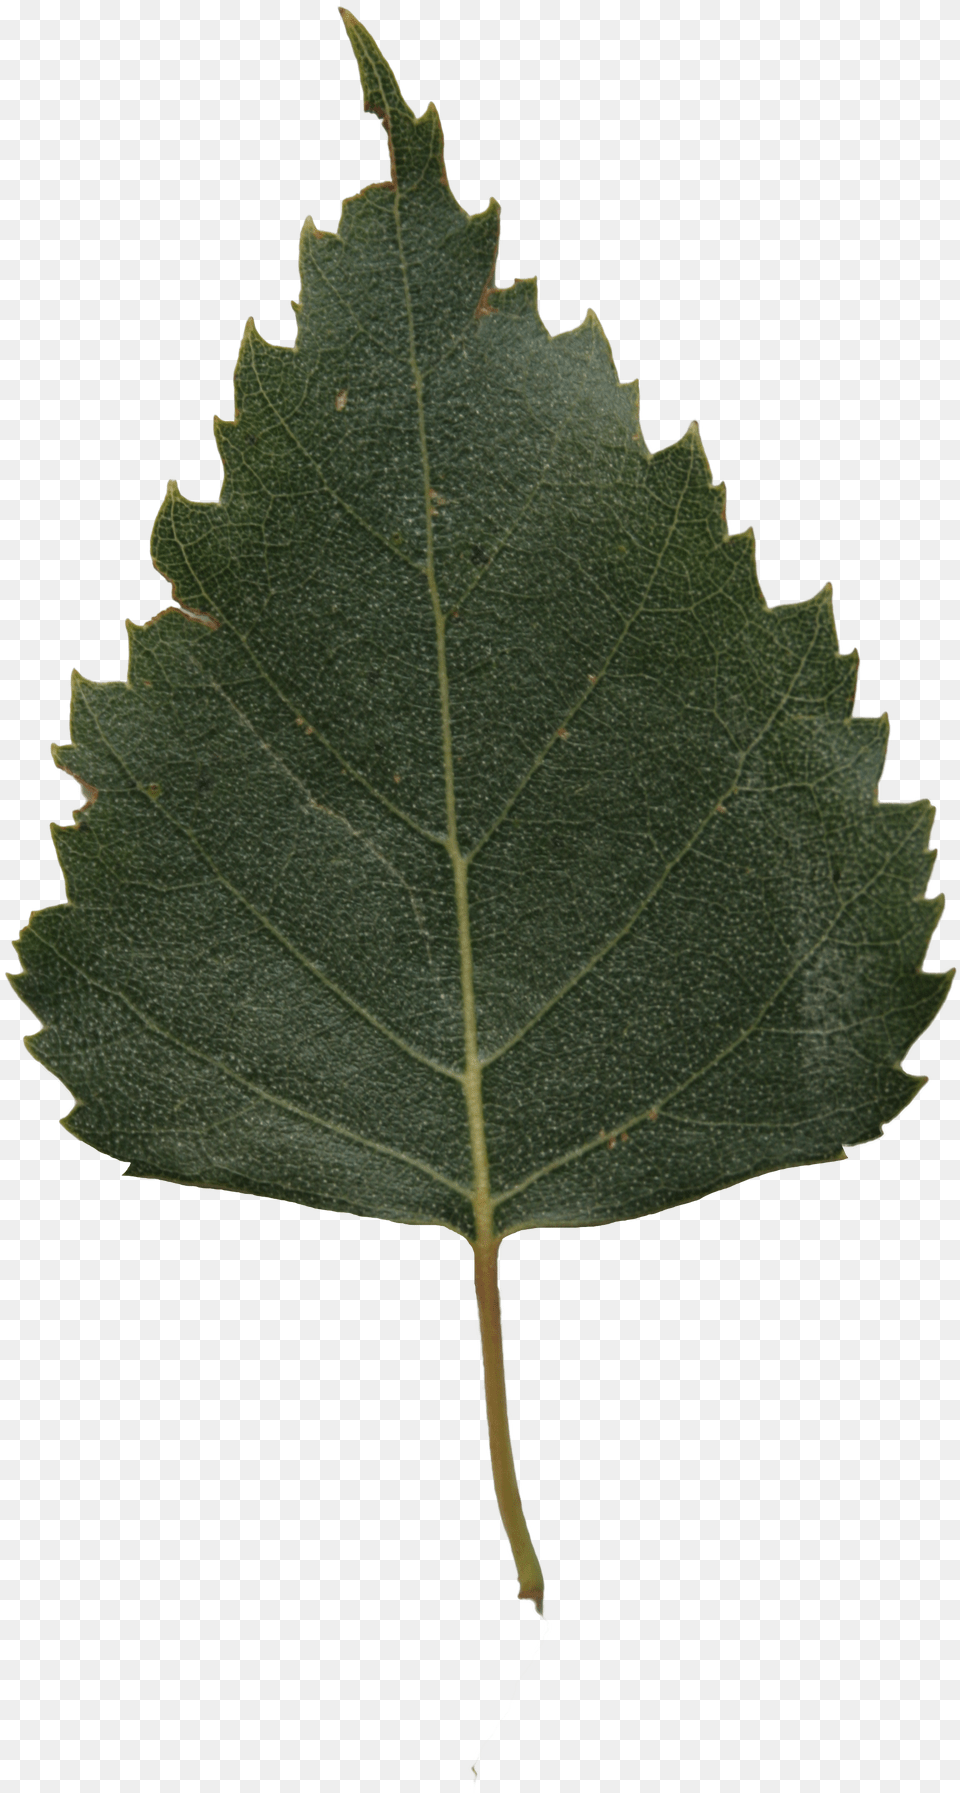 Birch Texture Cut Out People Trees And Leaves Birch Leaf Png Image